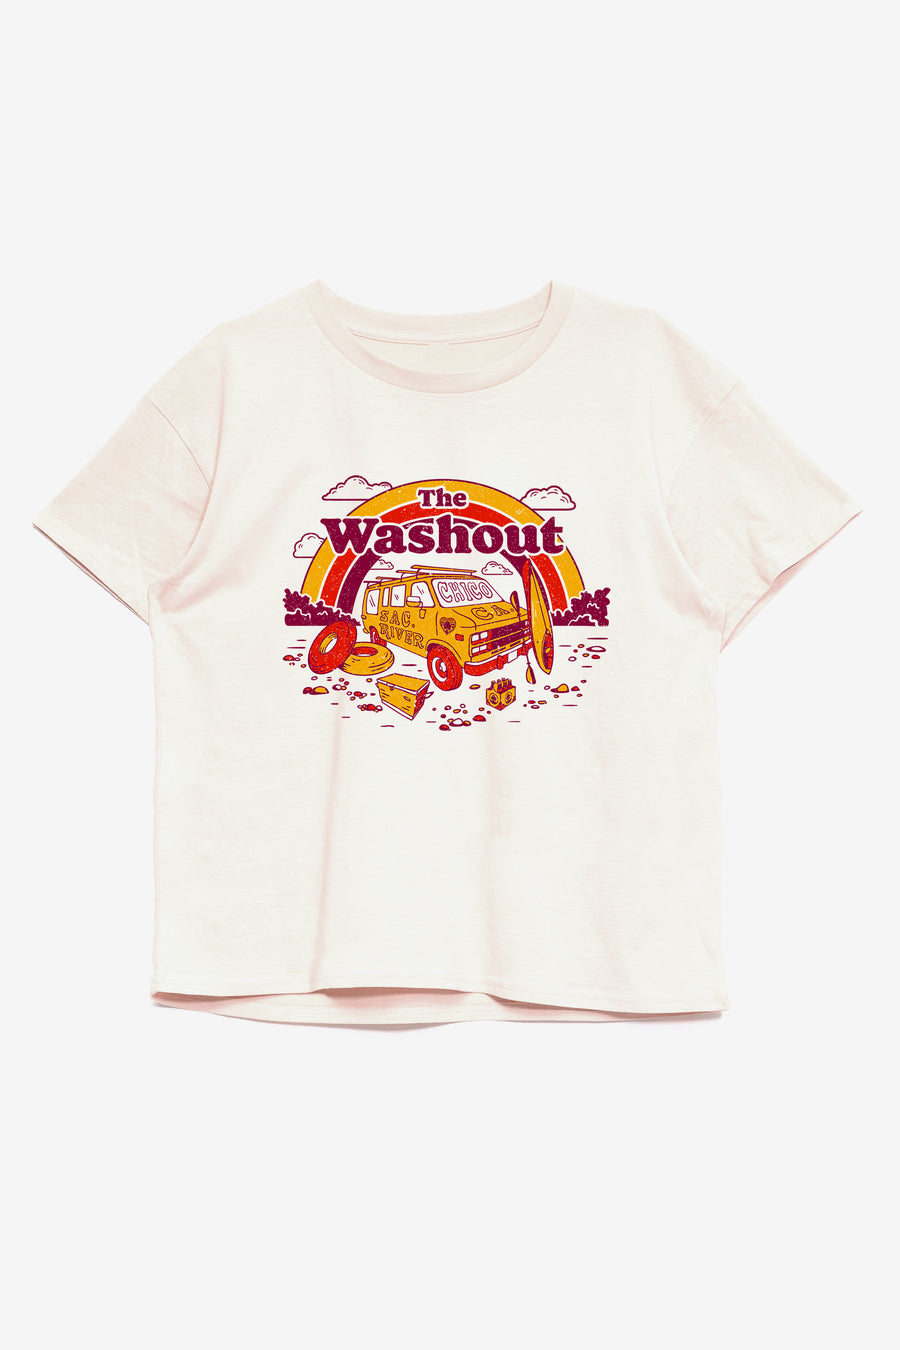 The Washout Routine Tee